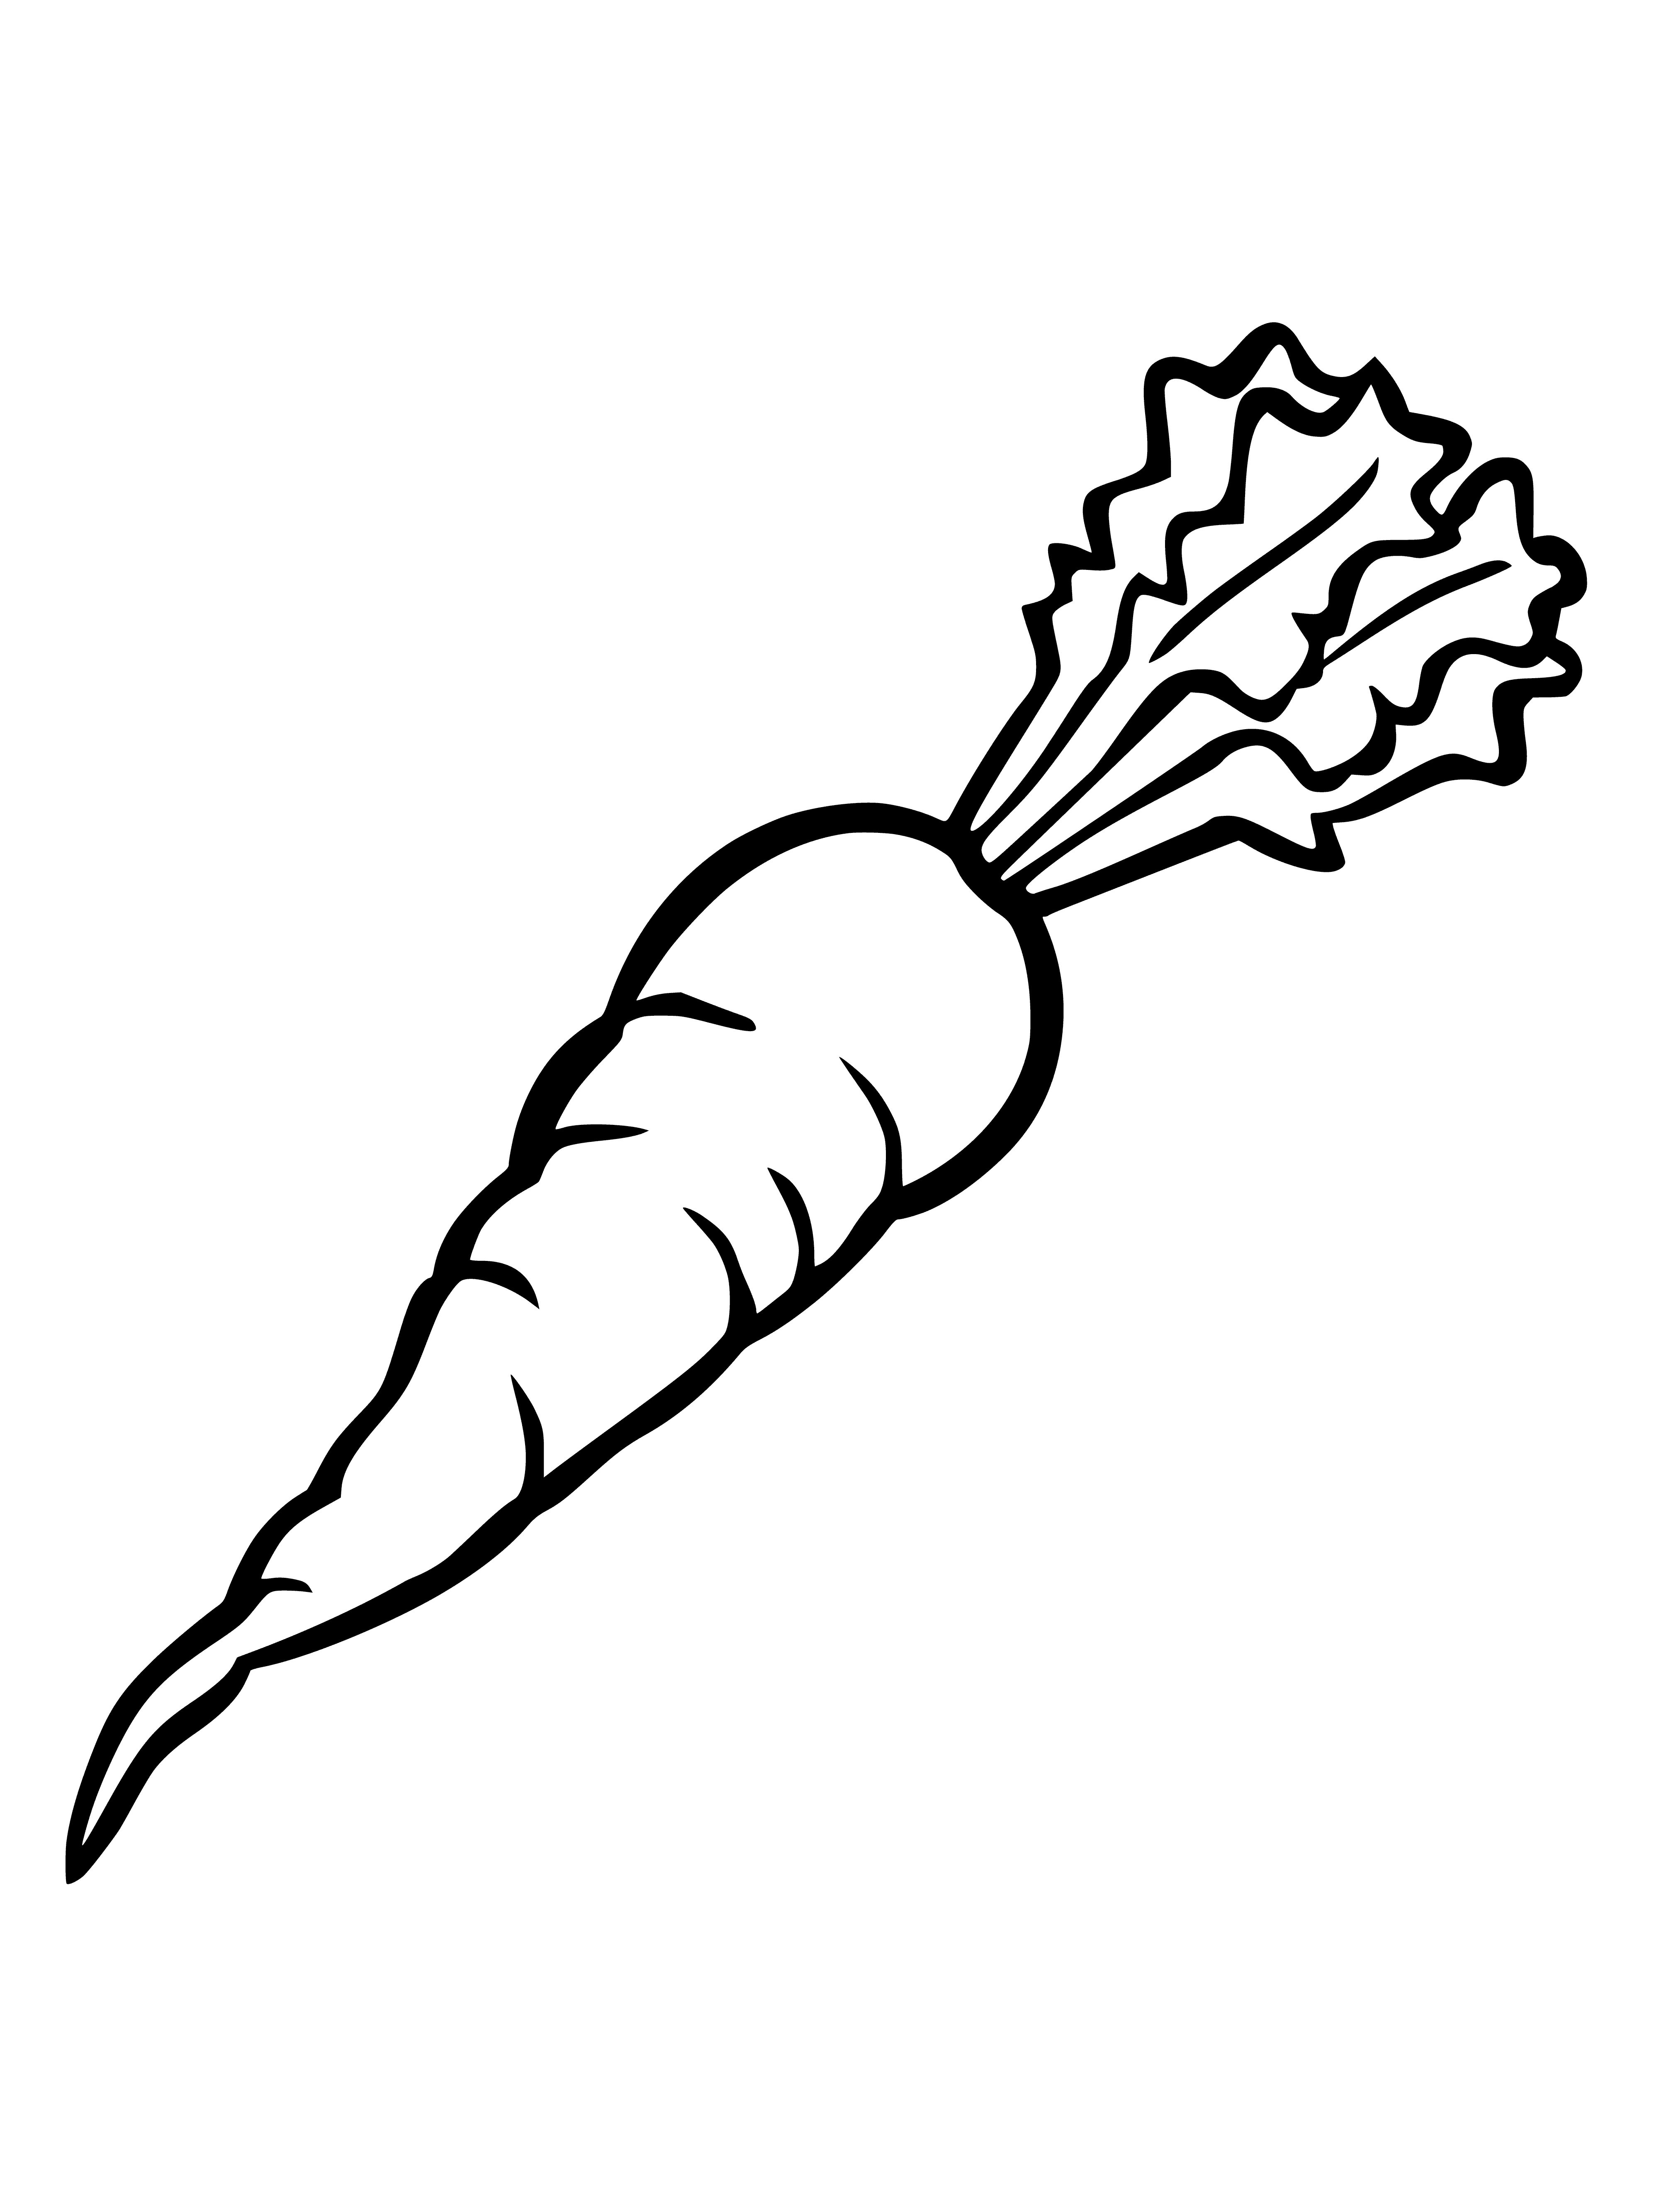 Carrot coloring page